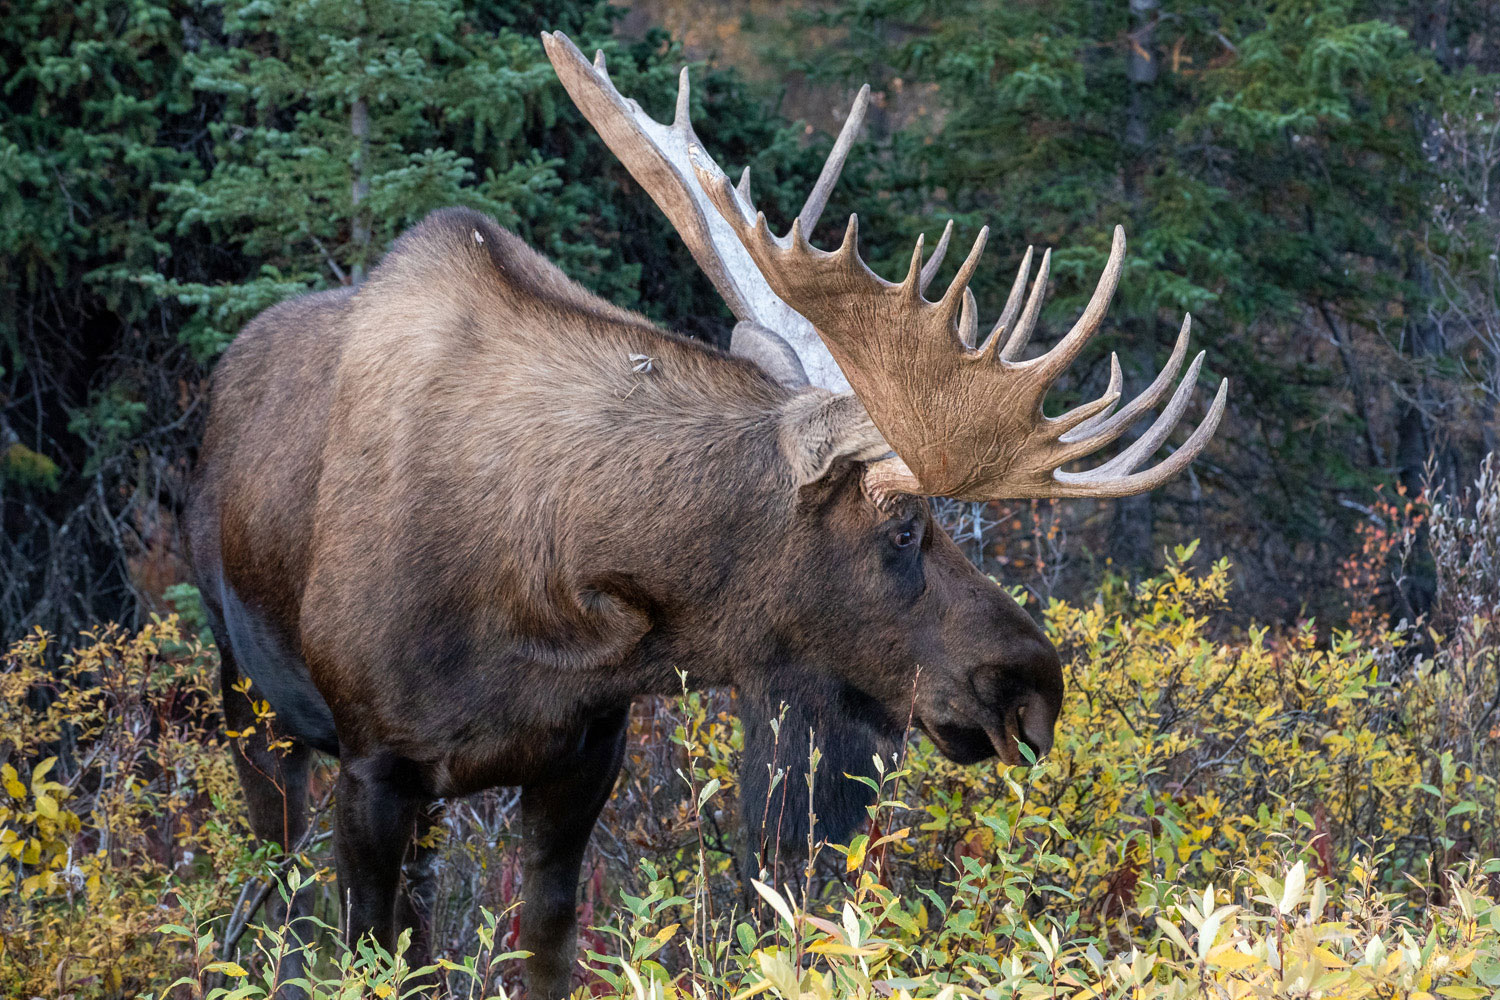 A large bull moose emerges from the willow thicket